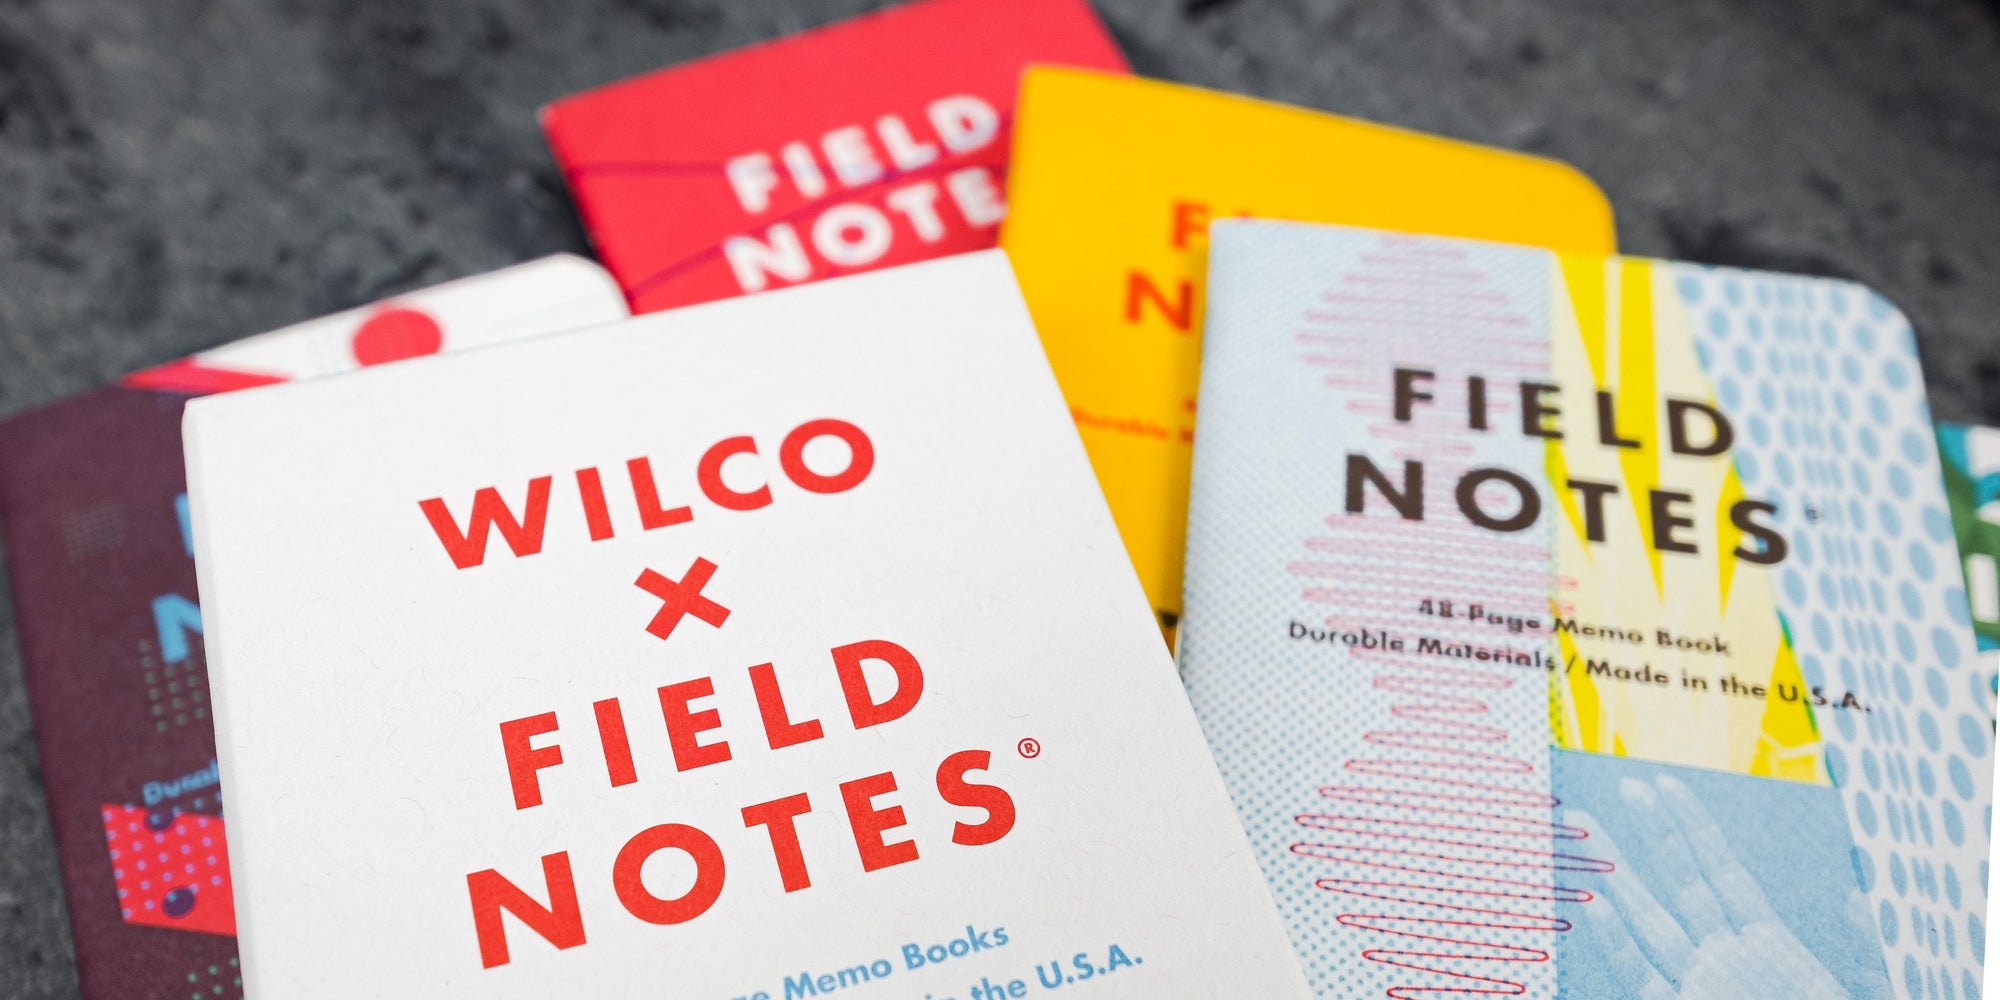 Field Notes - Wilco Box Set - 6 Pack